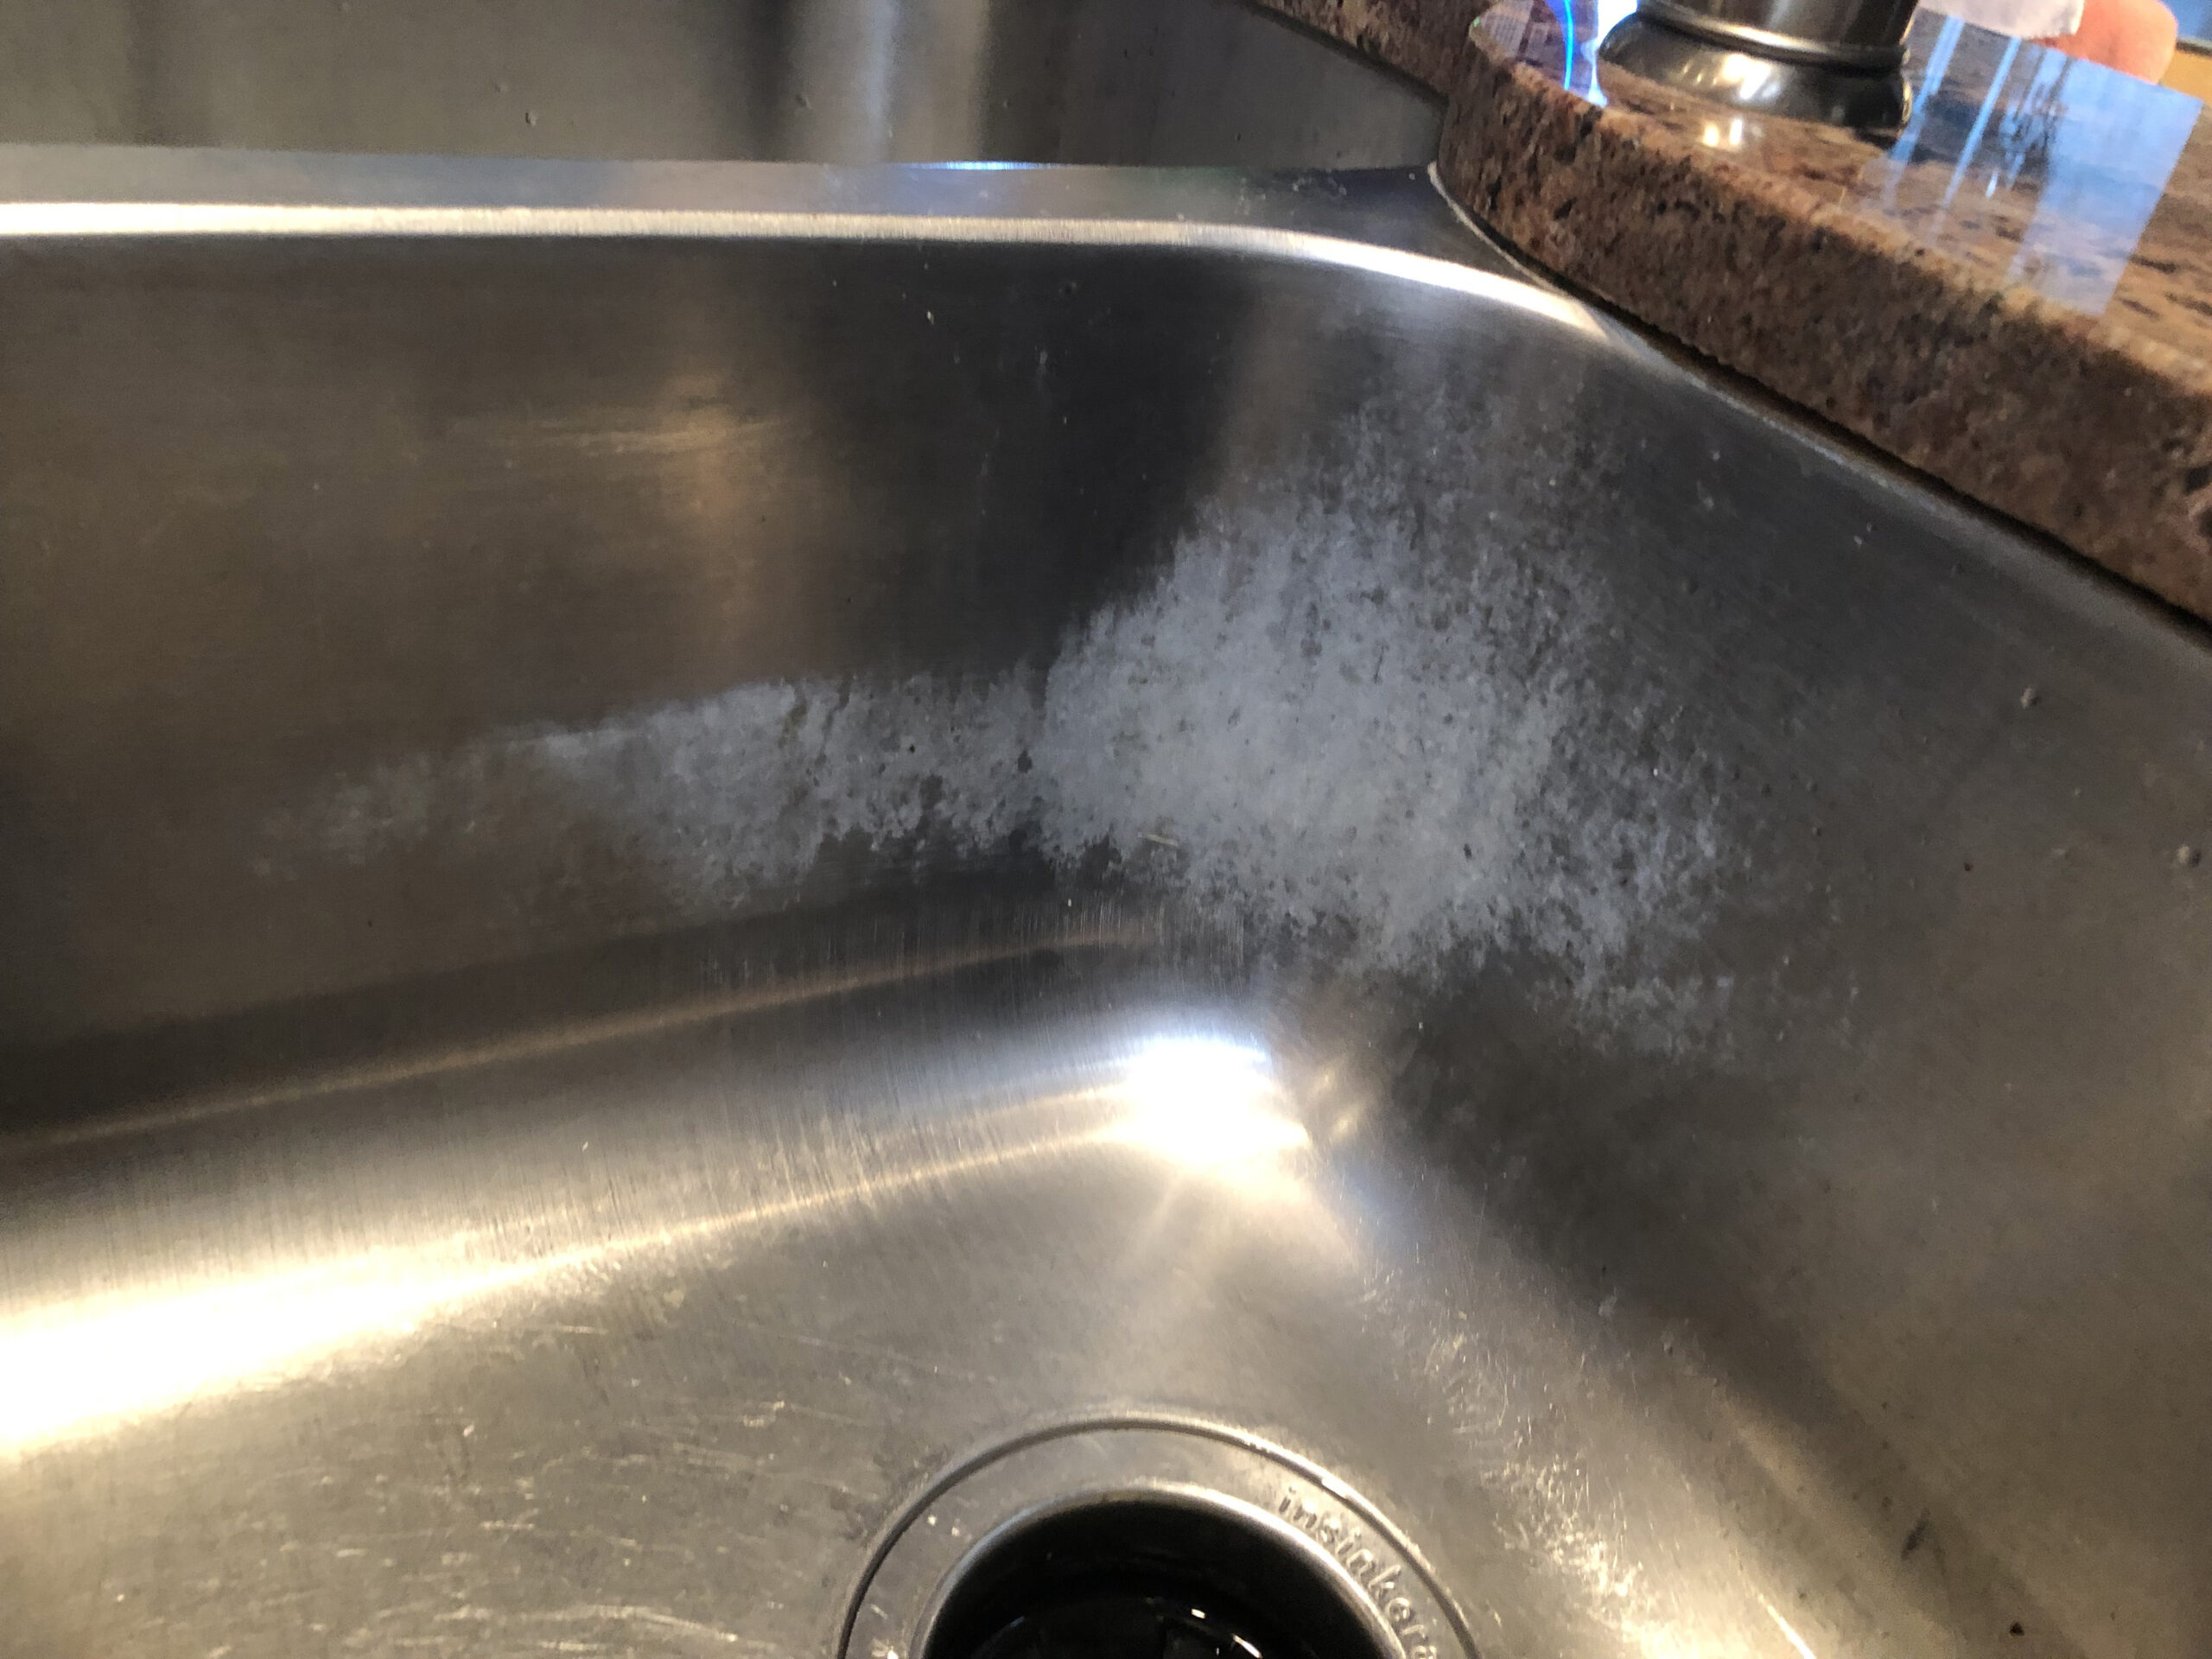 How Can I Make My Stainless Steel Sink Look New Again?